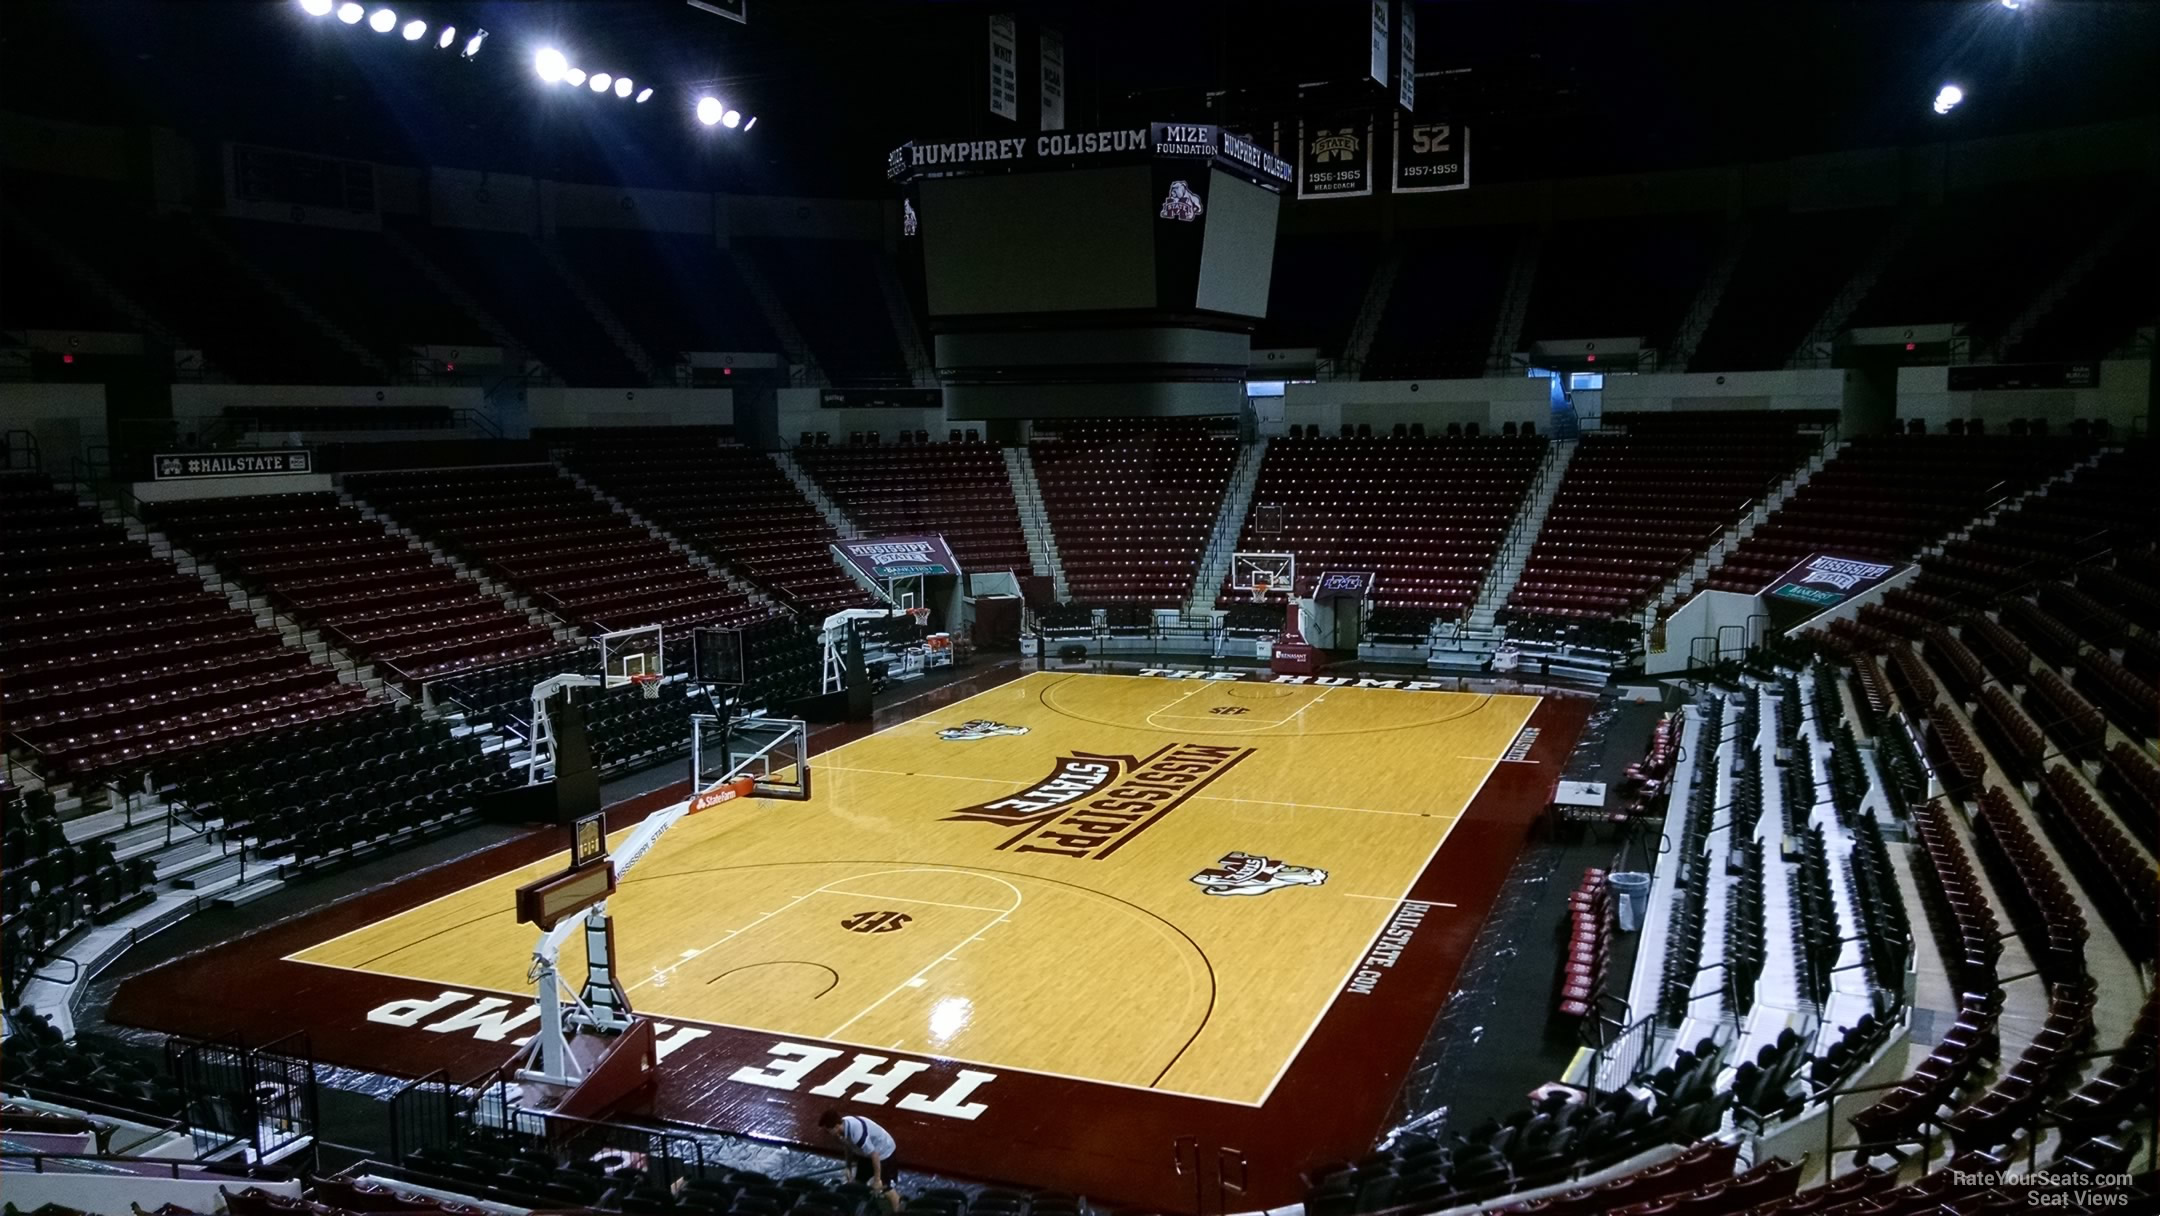 section 120, row 15 seat view  - humphrey coliseum